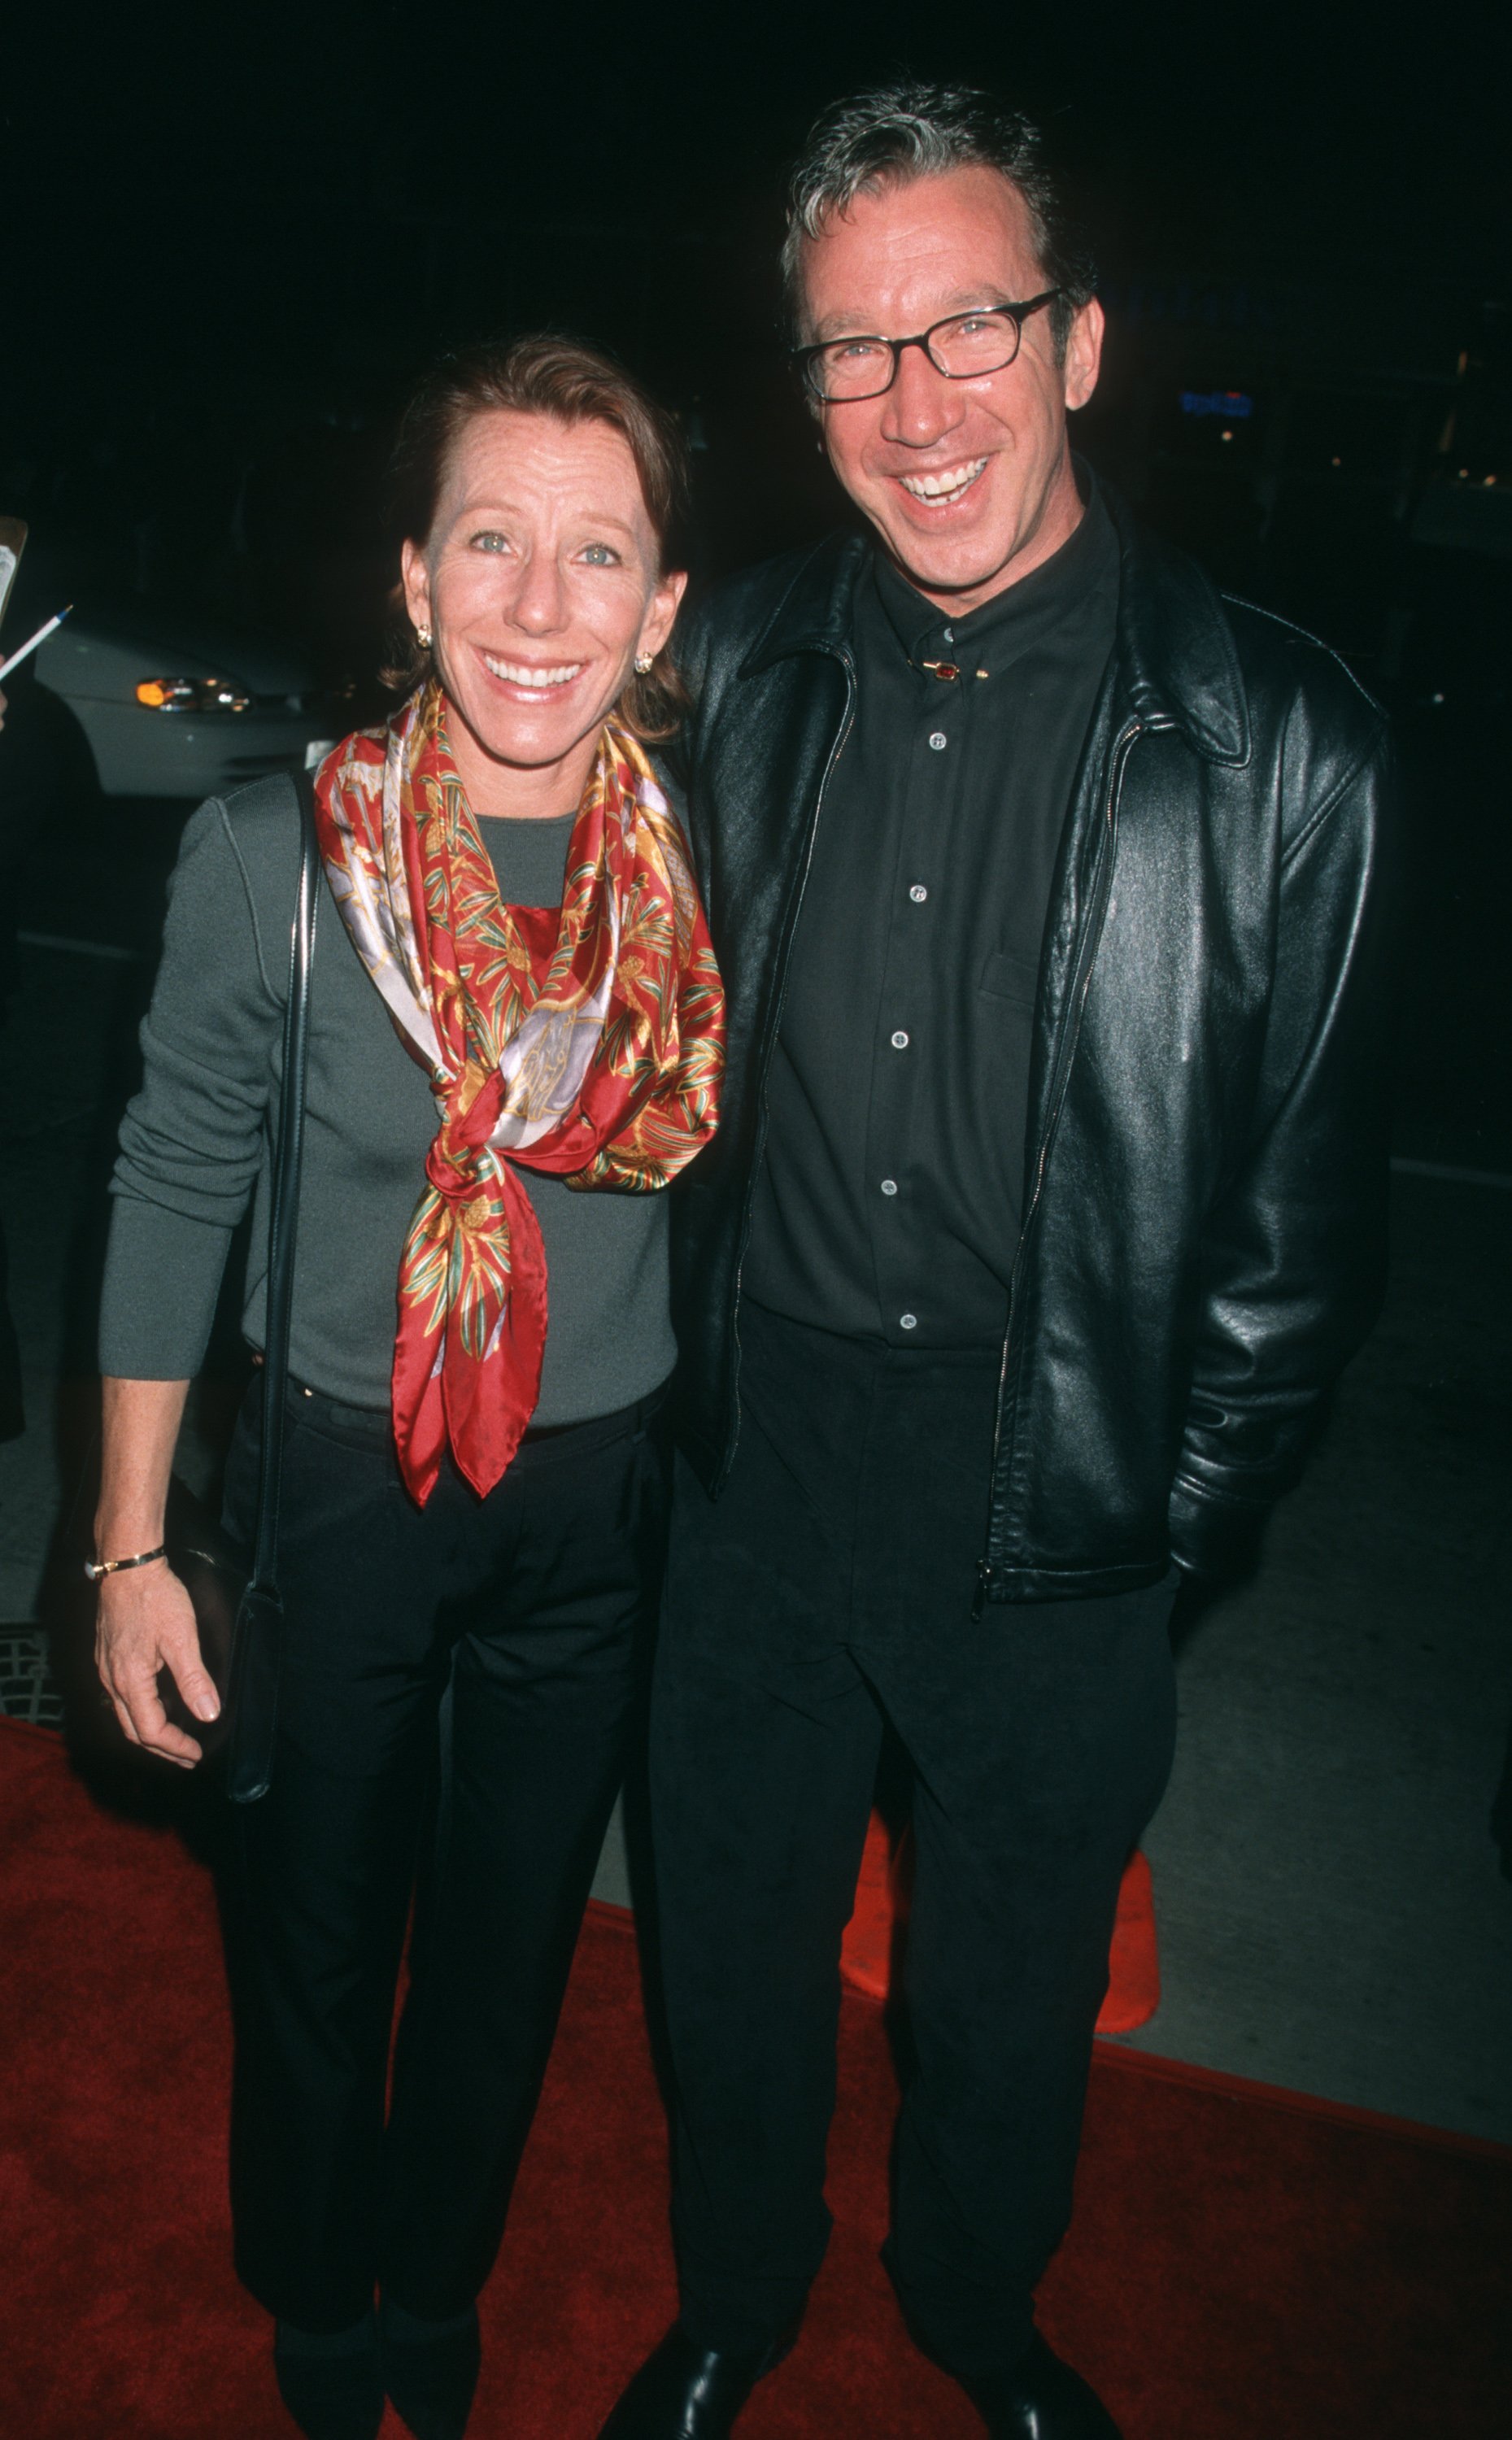 Laura Diebel and Tim Allen pose during the Westwood Premiere of "Beloved" at Mann Bruin Theatre on an unspecified date, in Westwood, California | Source: Getty Images